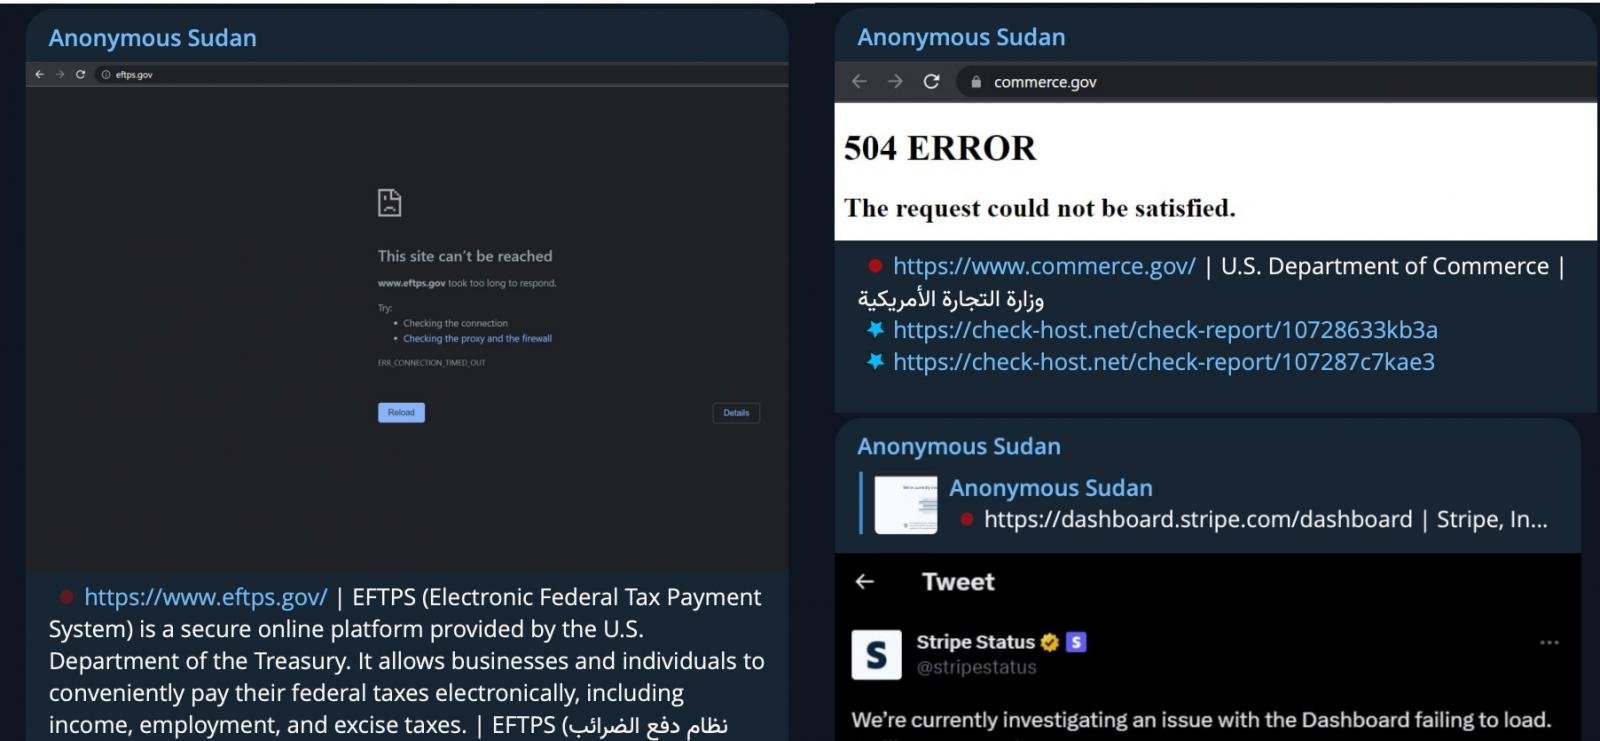 Anonymous claims of attacks in Sudan